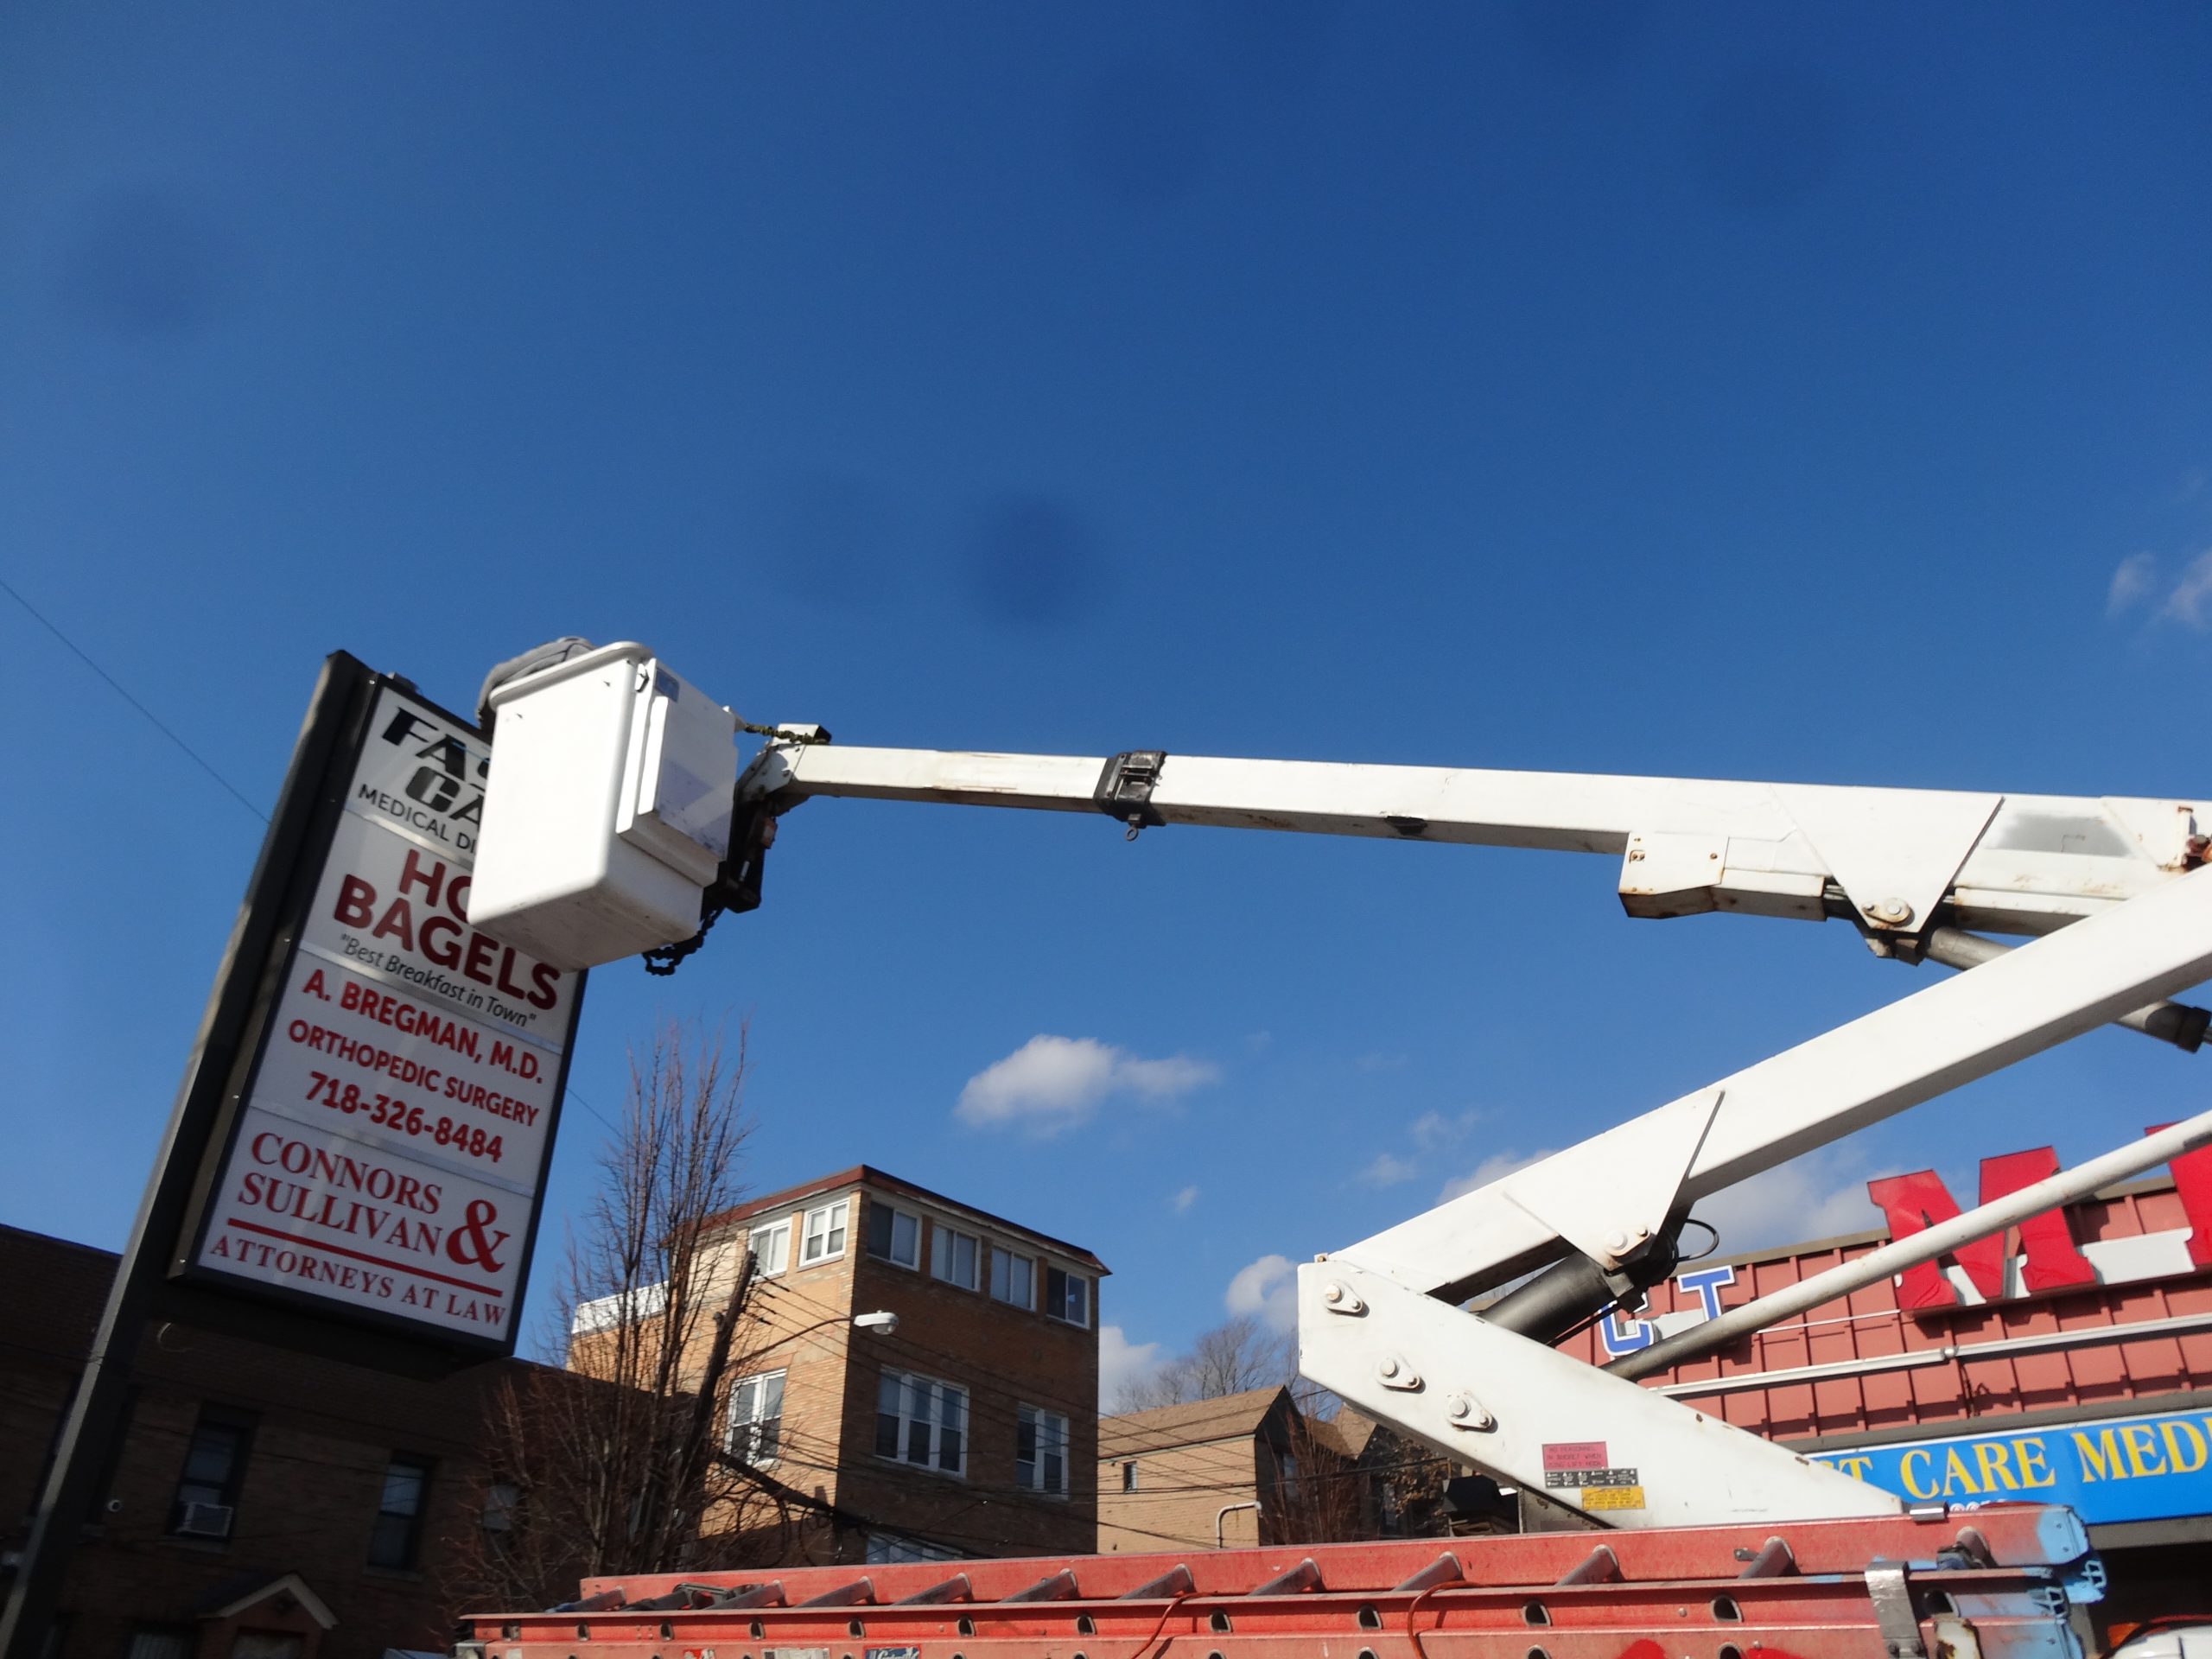 sign repair services new jersey city